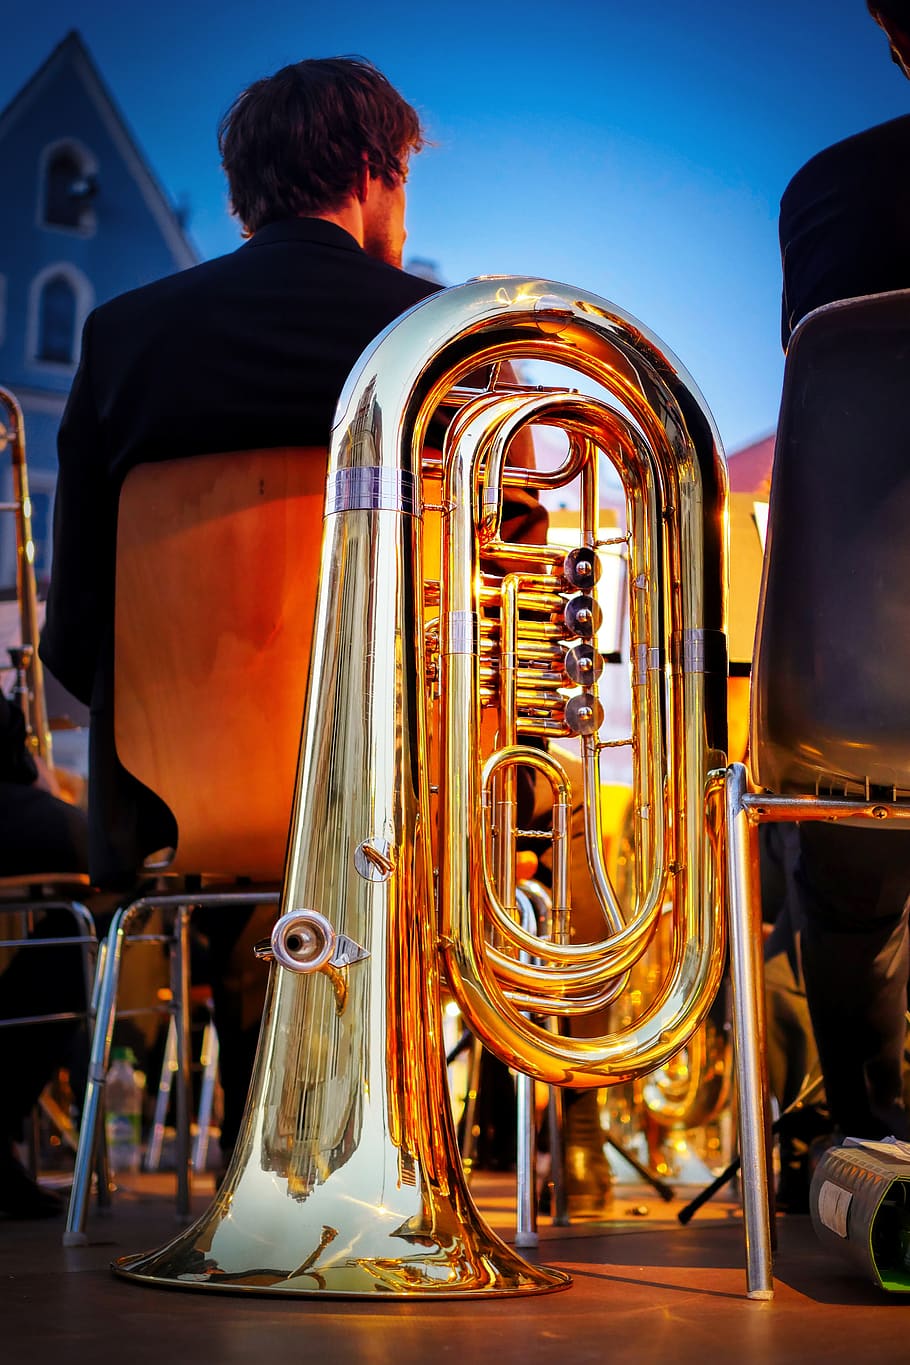 concert, stable, tuba, wind instrument, musical instrument, brass band, music band, blowers, music, instrument